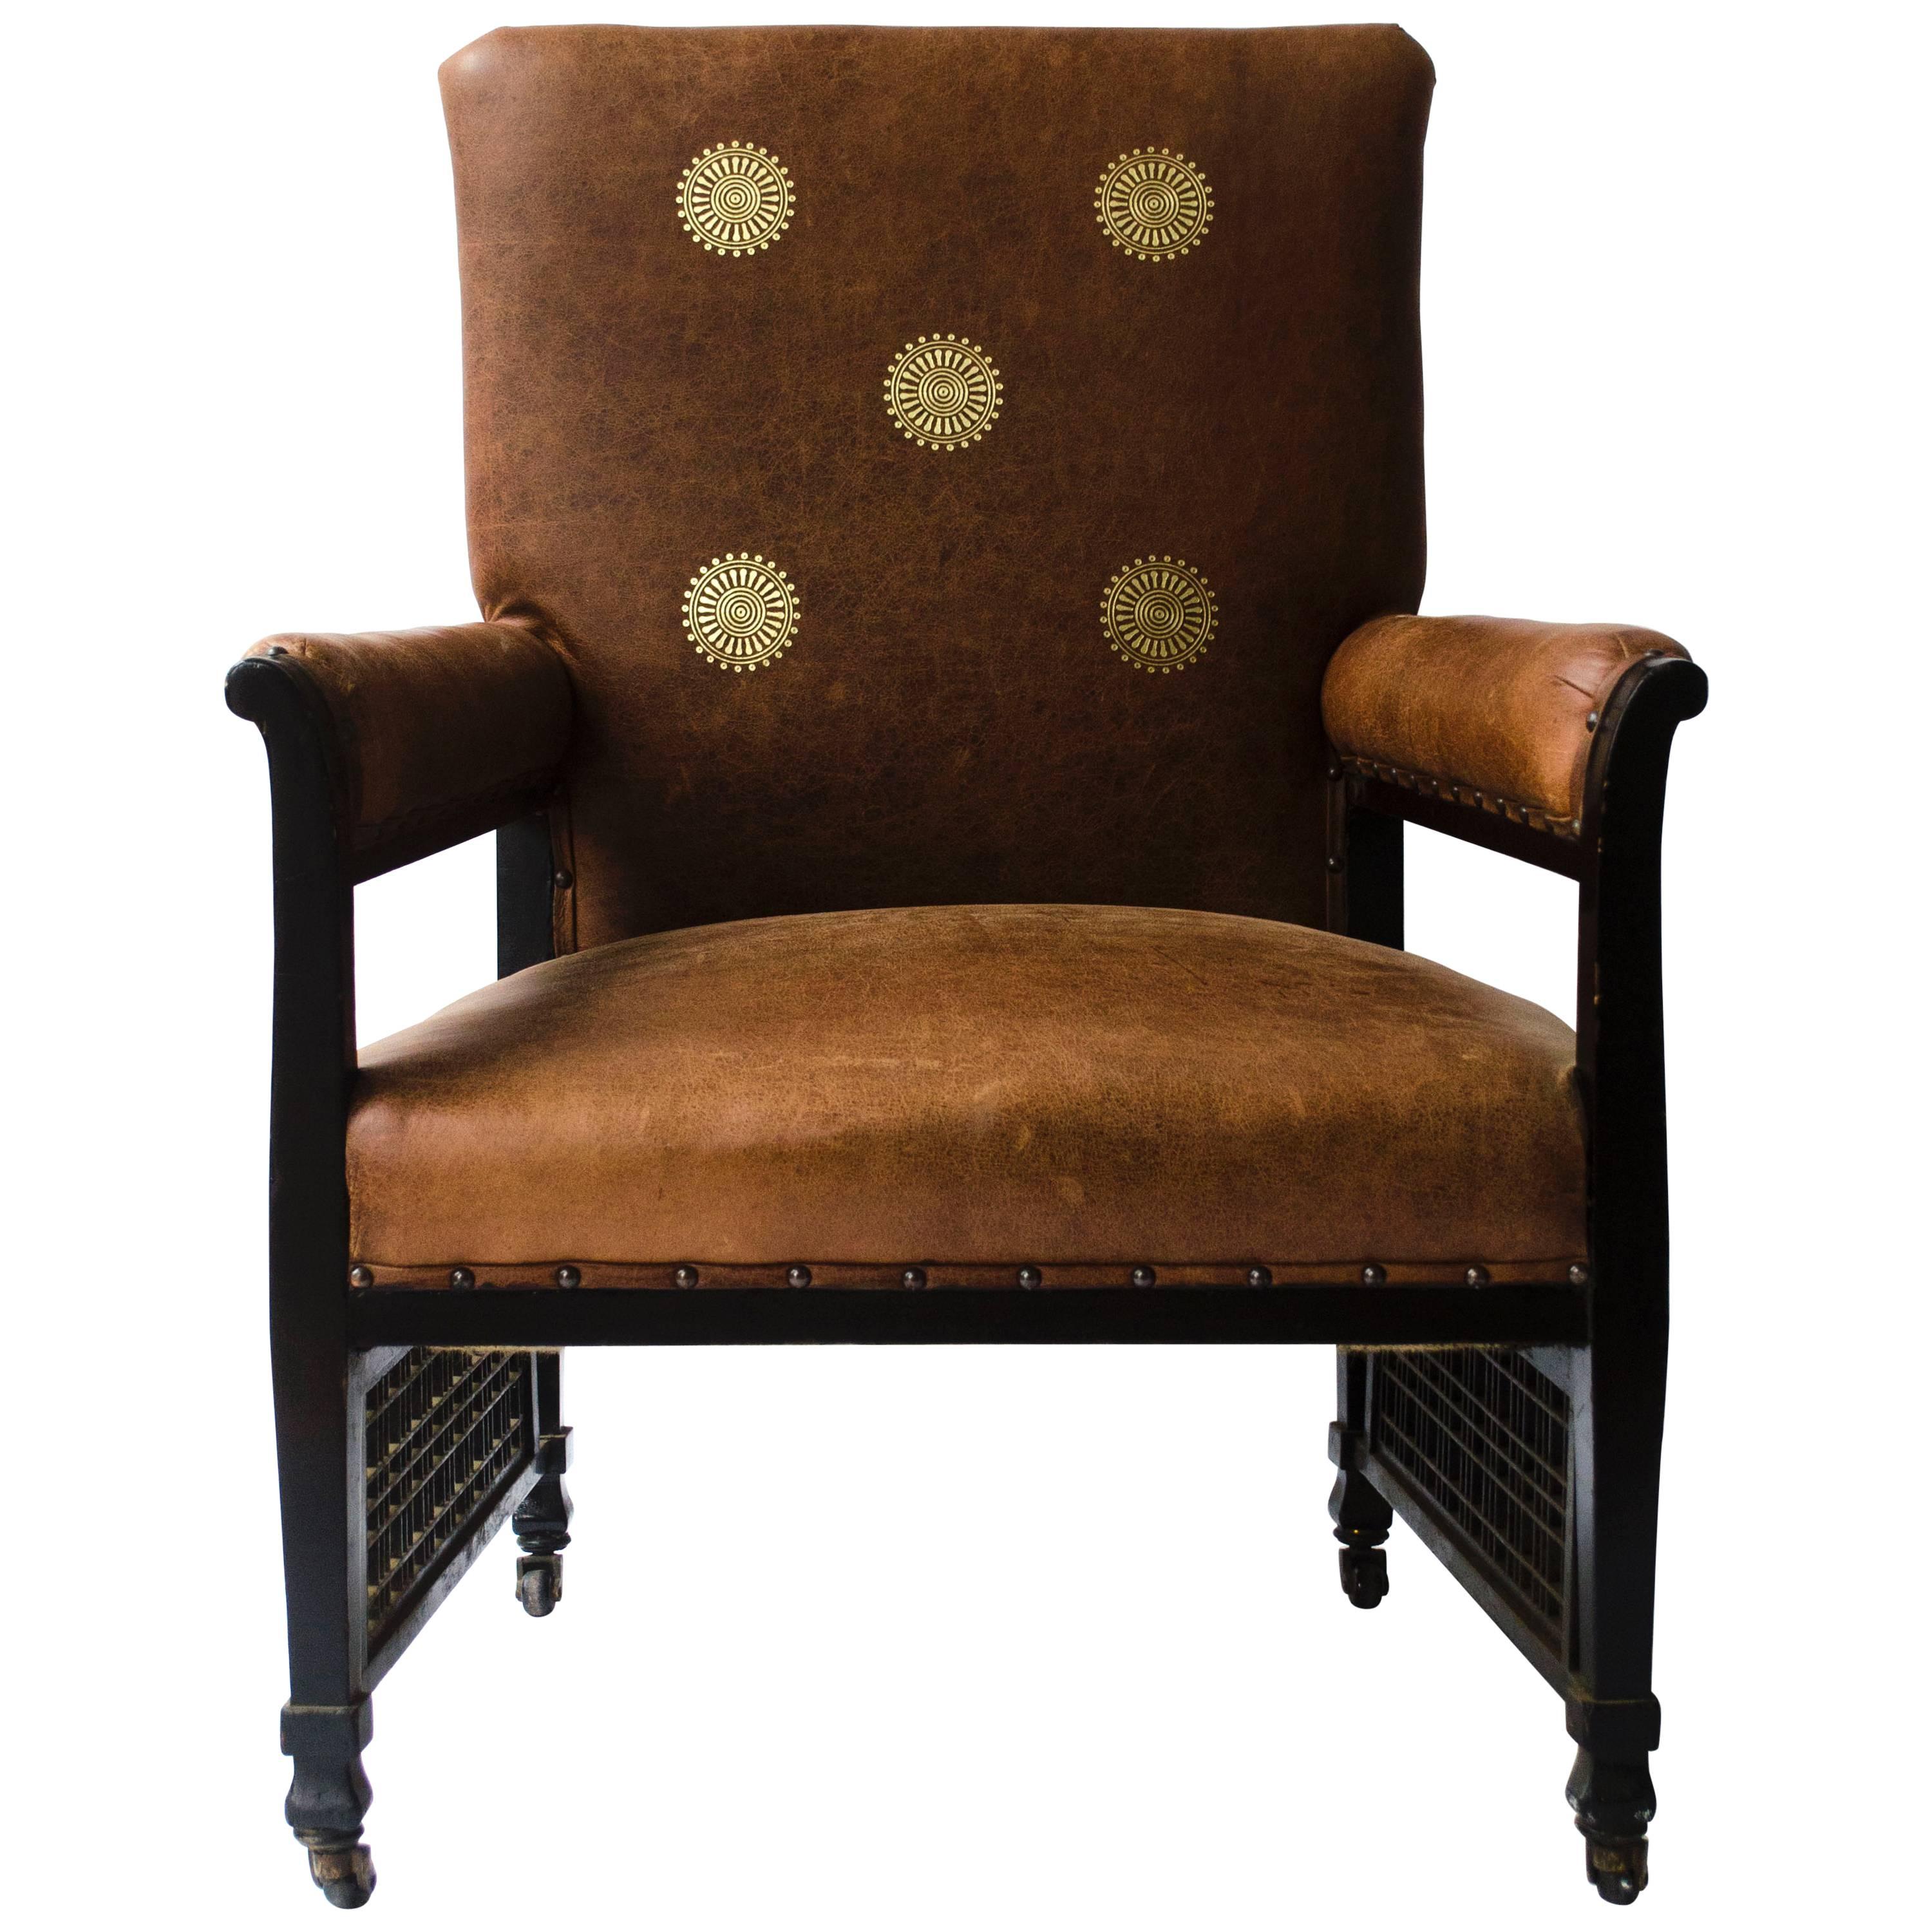 An Anglo-Japanese Lounge Chair with EW Godwin Design Embossed Leather Sunflowers